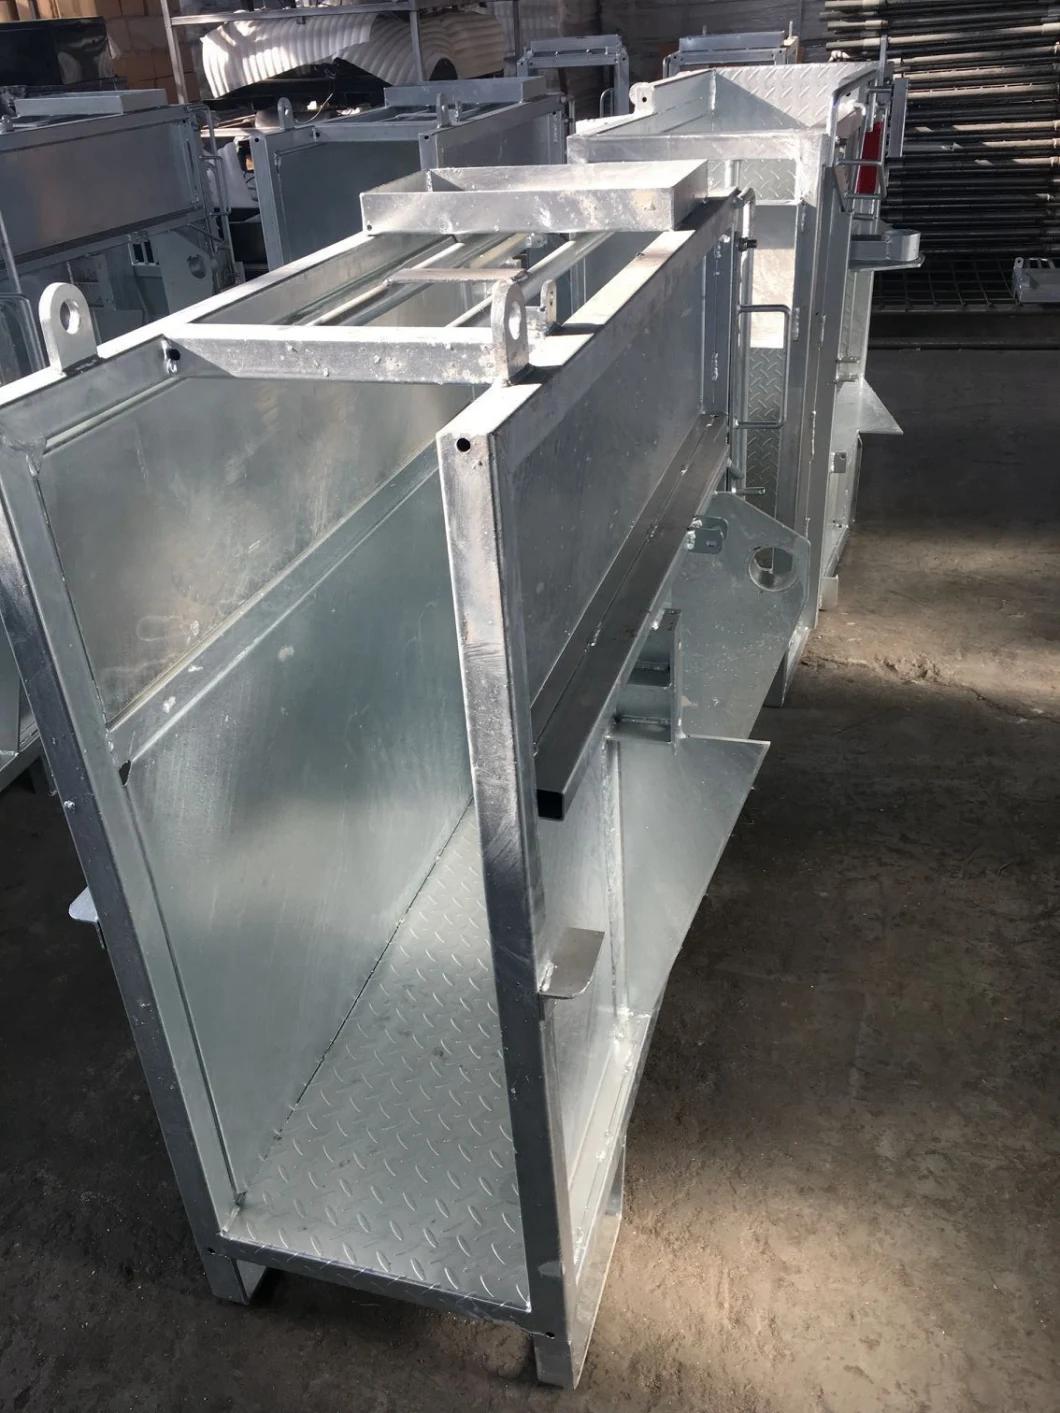 Hot Dipped Galvanised Livestock Machinery Calf Box for Sale